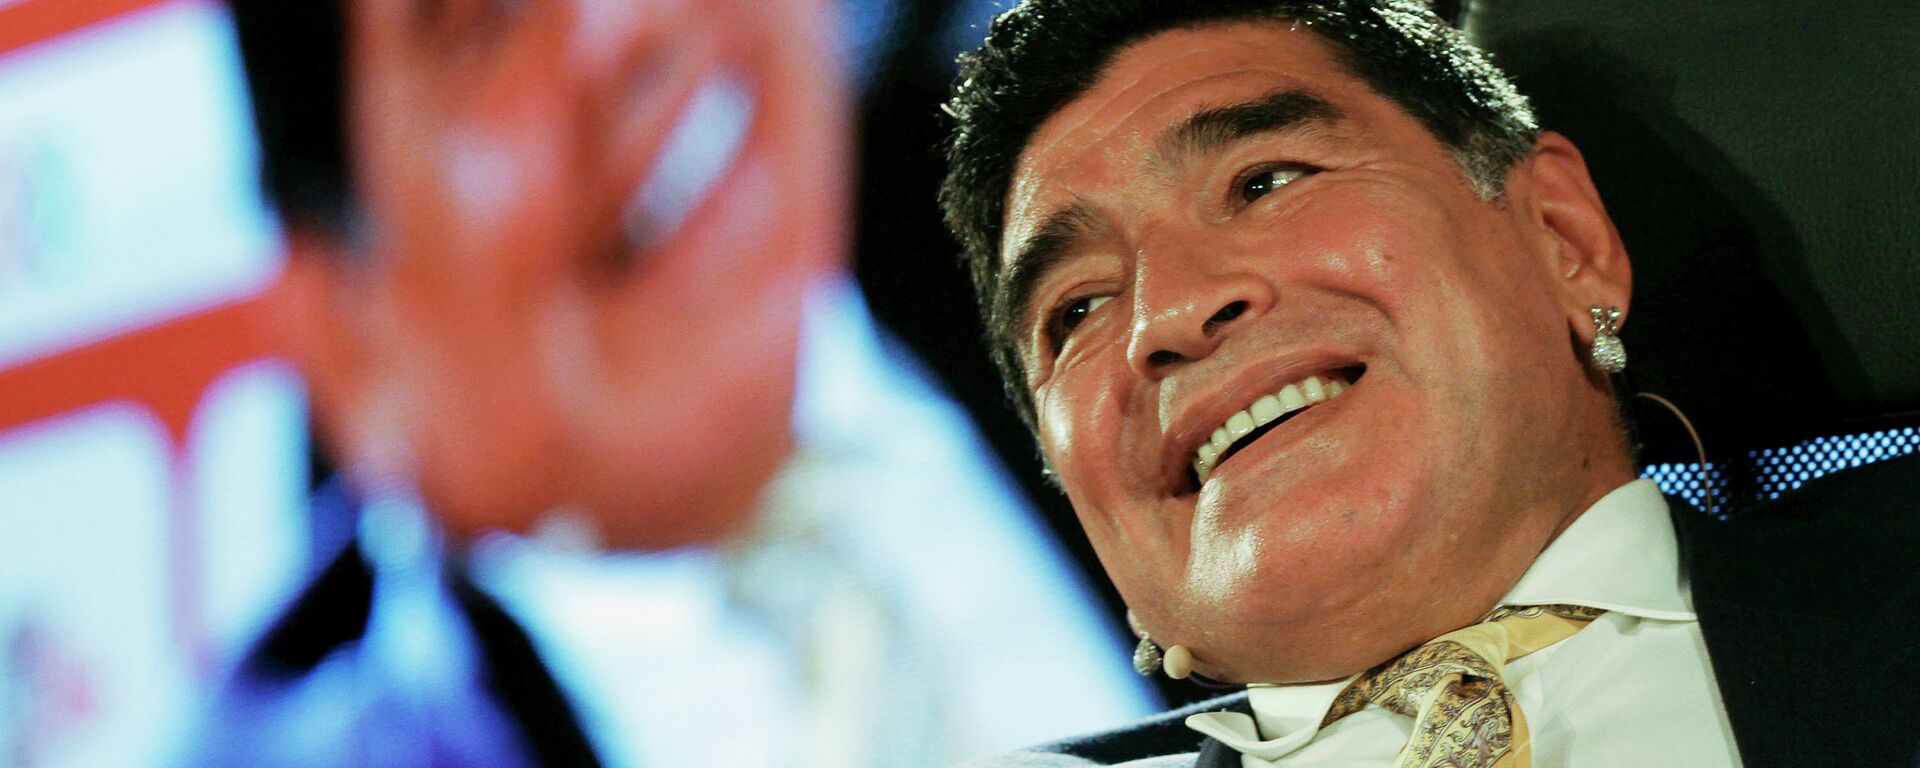 Argentina football legend Diego Maradona speaks on the second day of the SoccerEx Asian Forum conference in Southern Shuneh, Jordan, Monday, May 4, 2015. - Sputnik Mundo, 1920, 26.11.2020